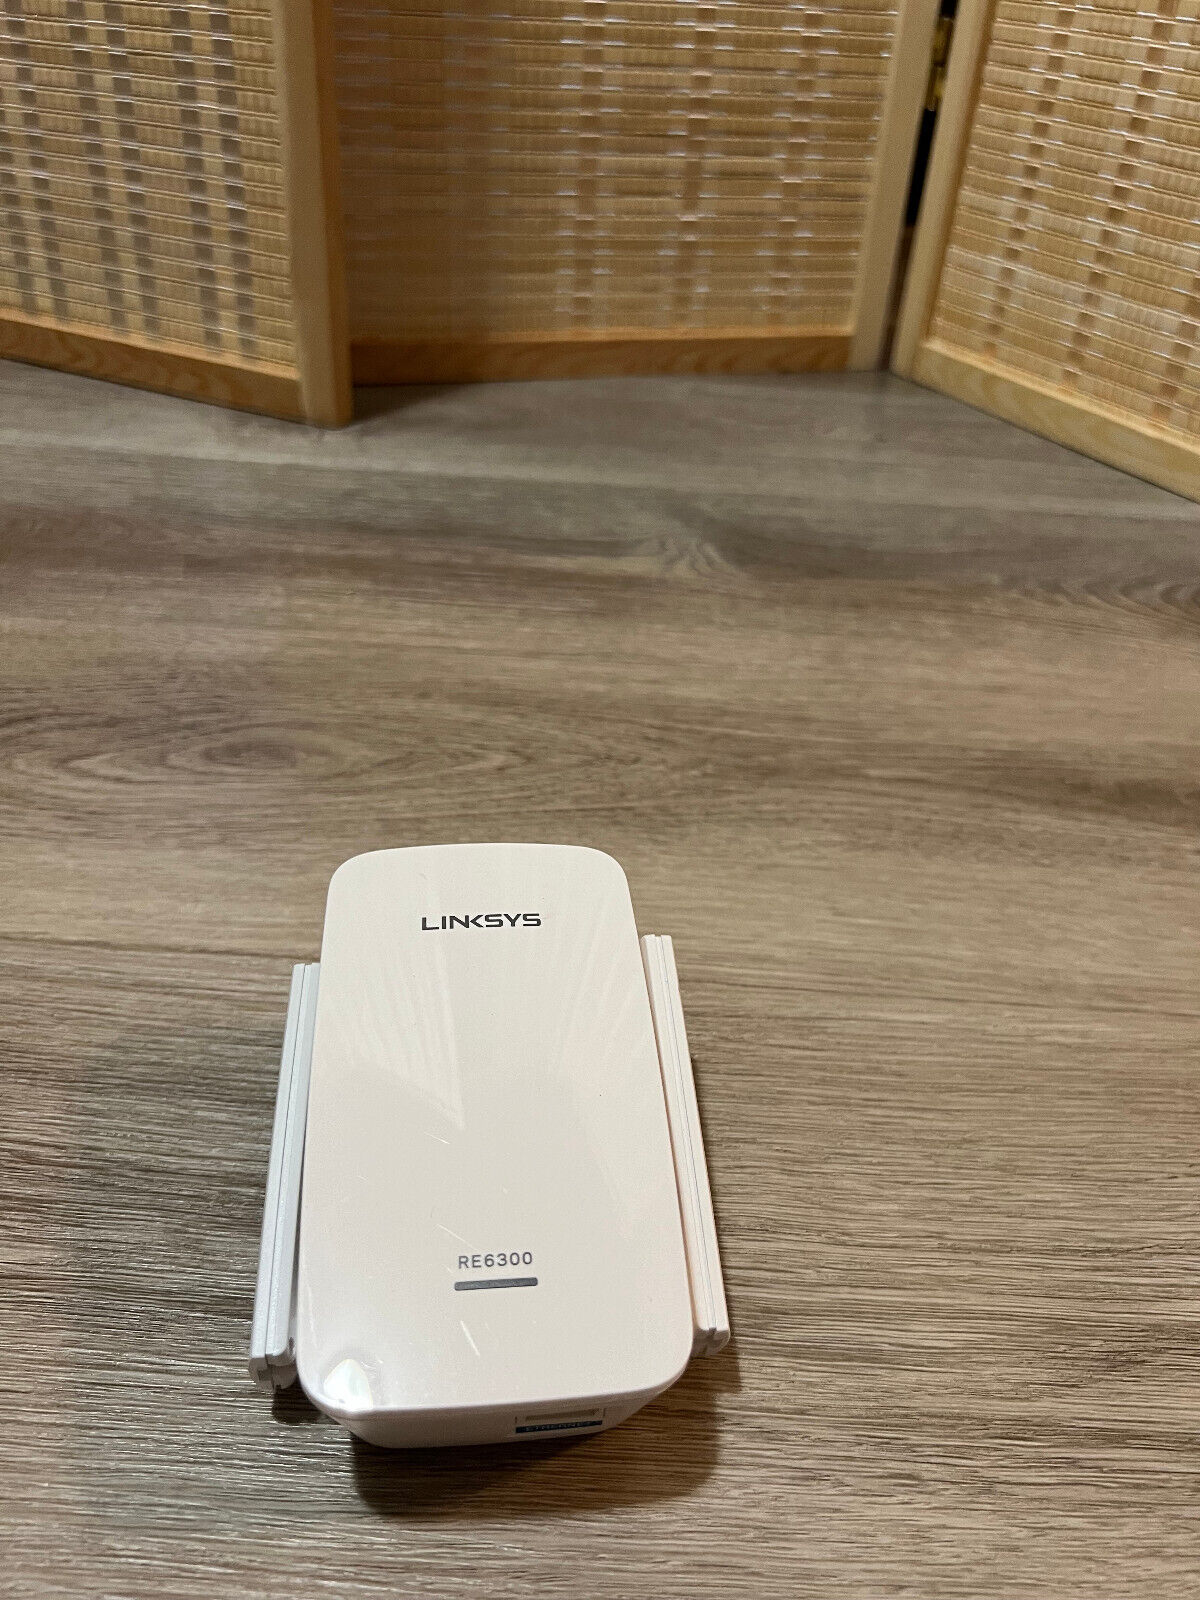 Linksys RE6300 WiFi Range Extender Fully Tested Works Great (J9)